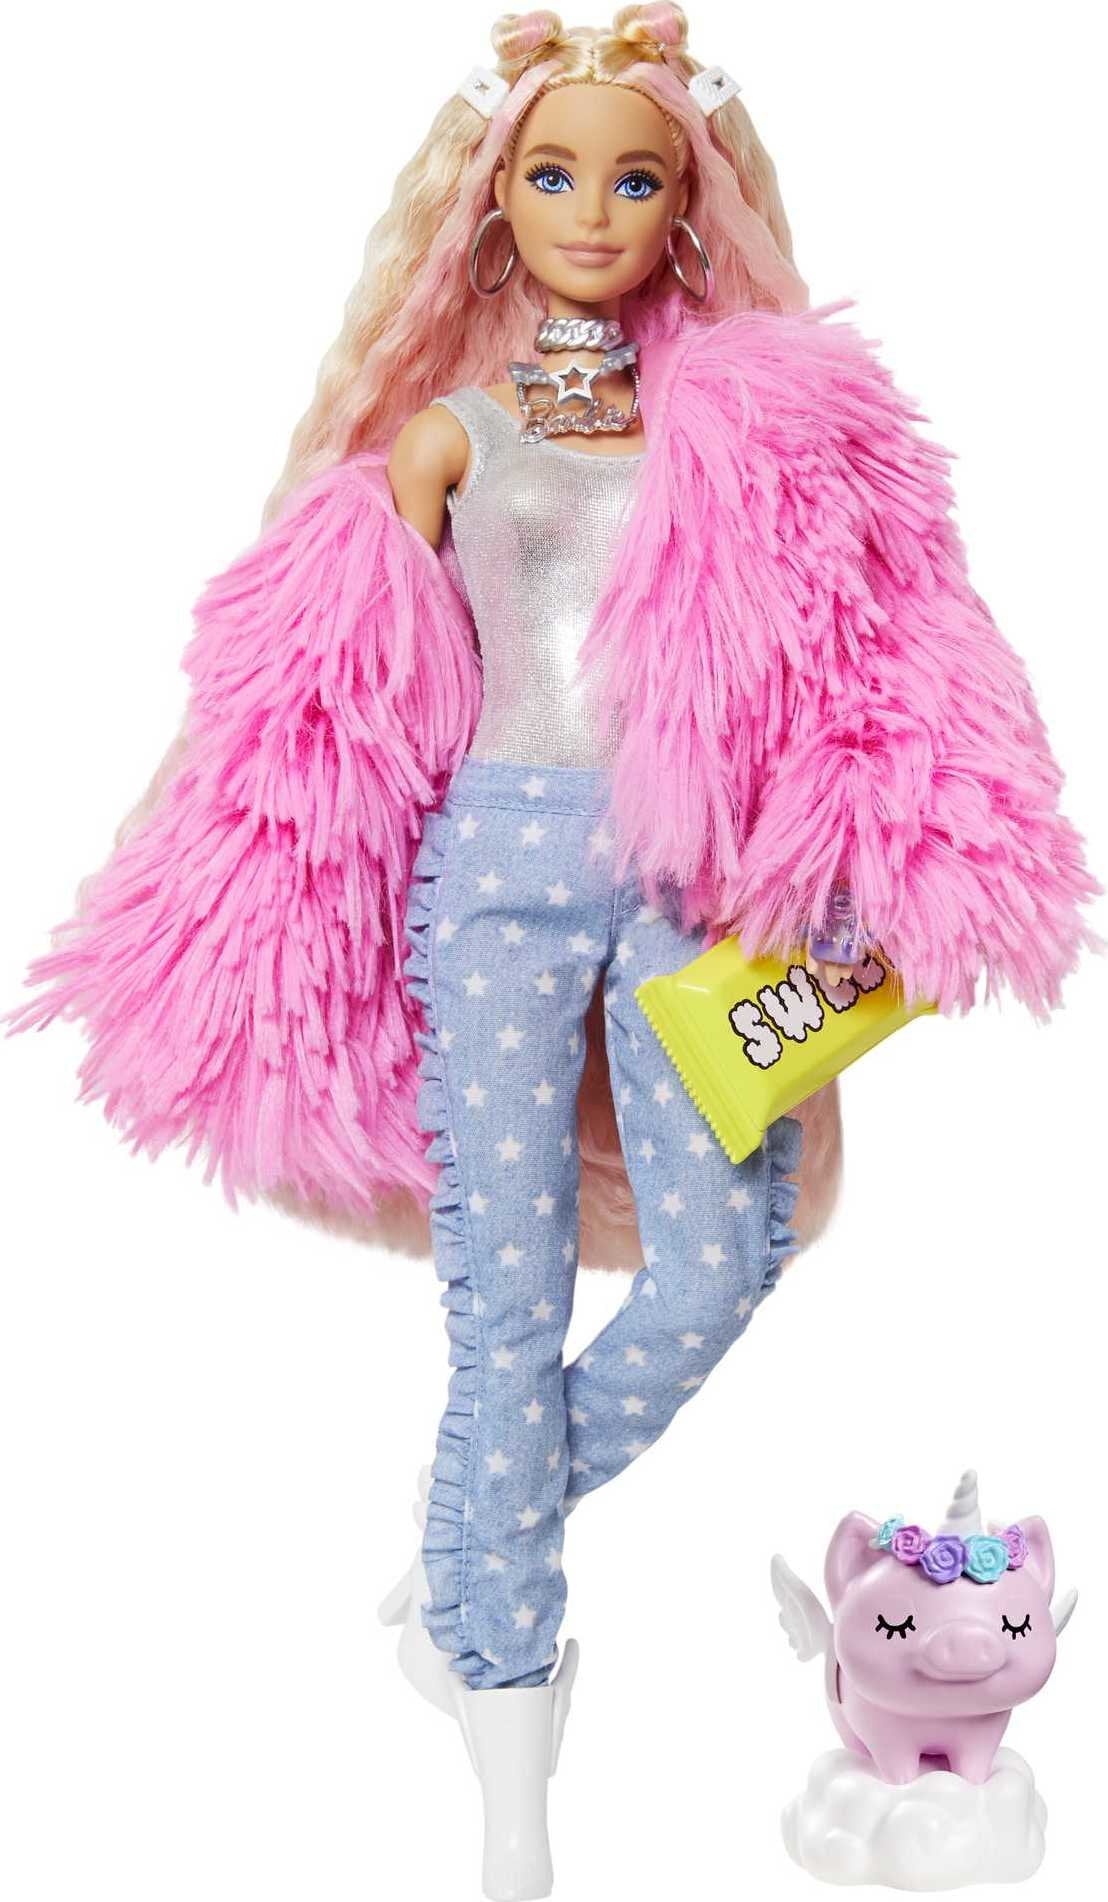 Uluru Ledelse klamre sig Barbie Extra Fashion Doll with Crimped Hair in Fluffy Pink Coat with  Accessories & Pet - Walmart.com